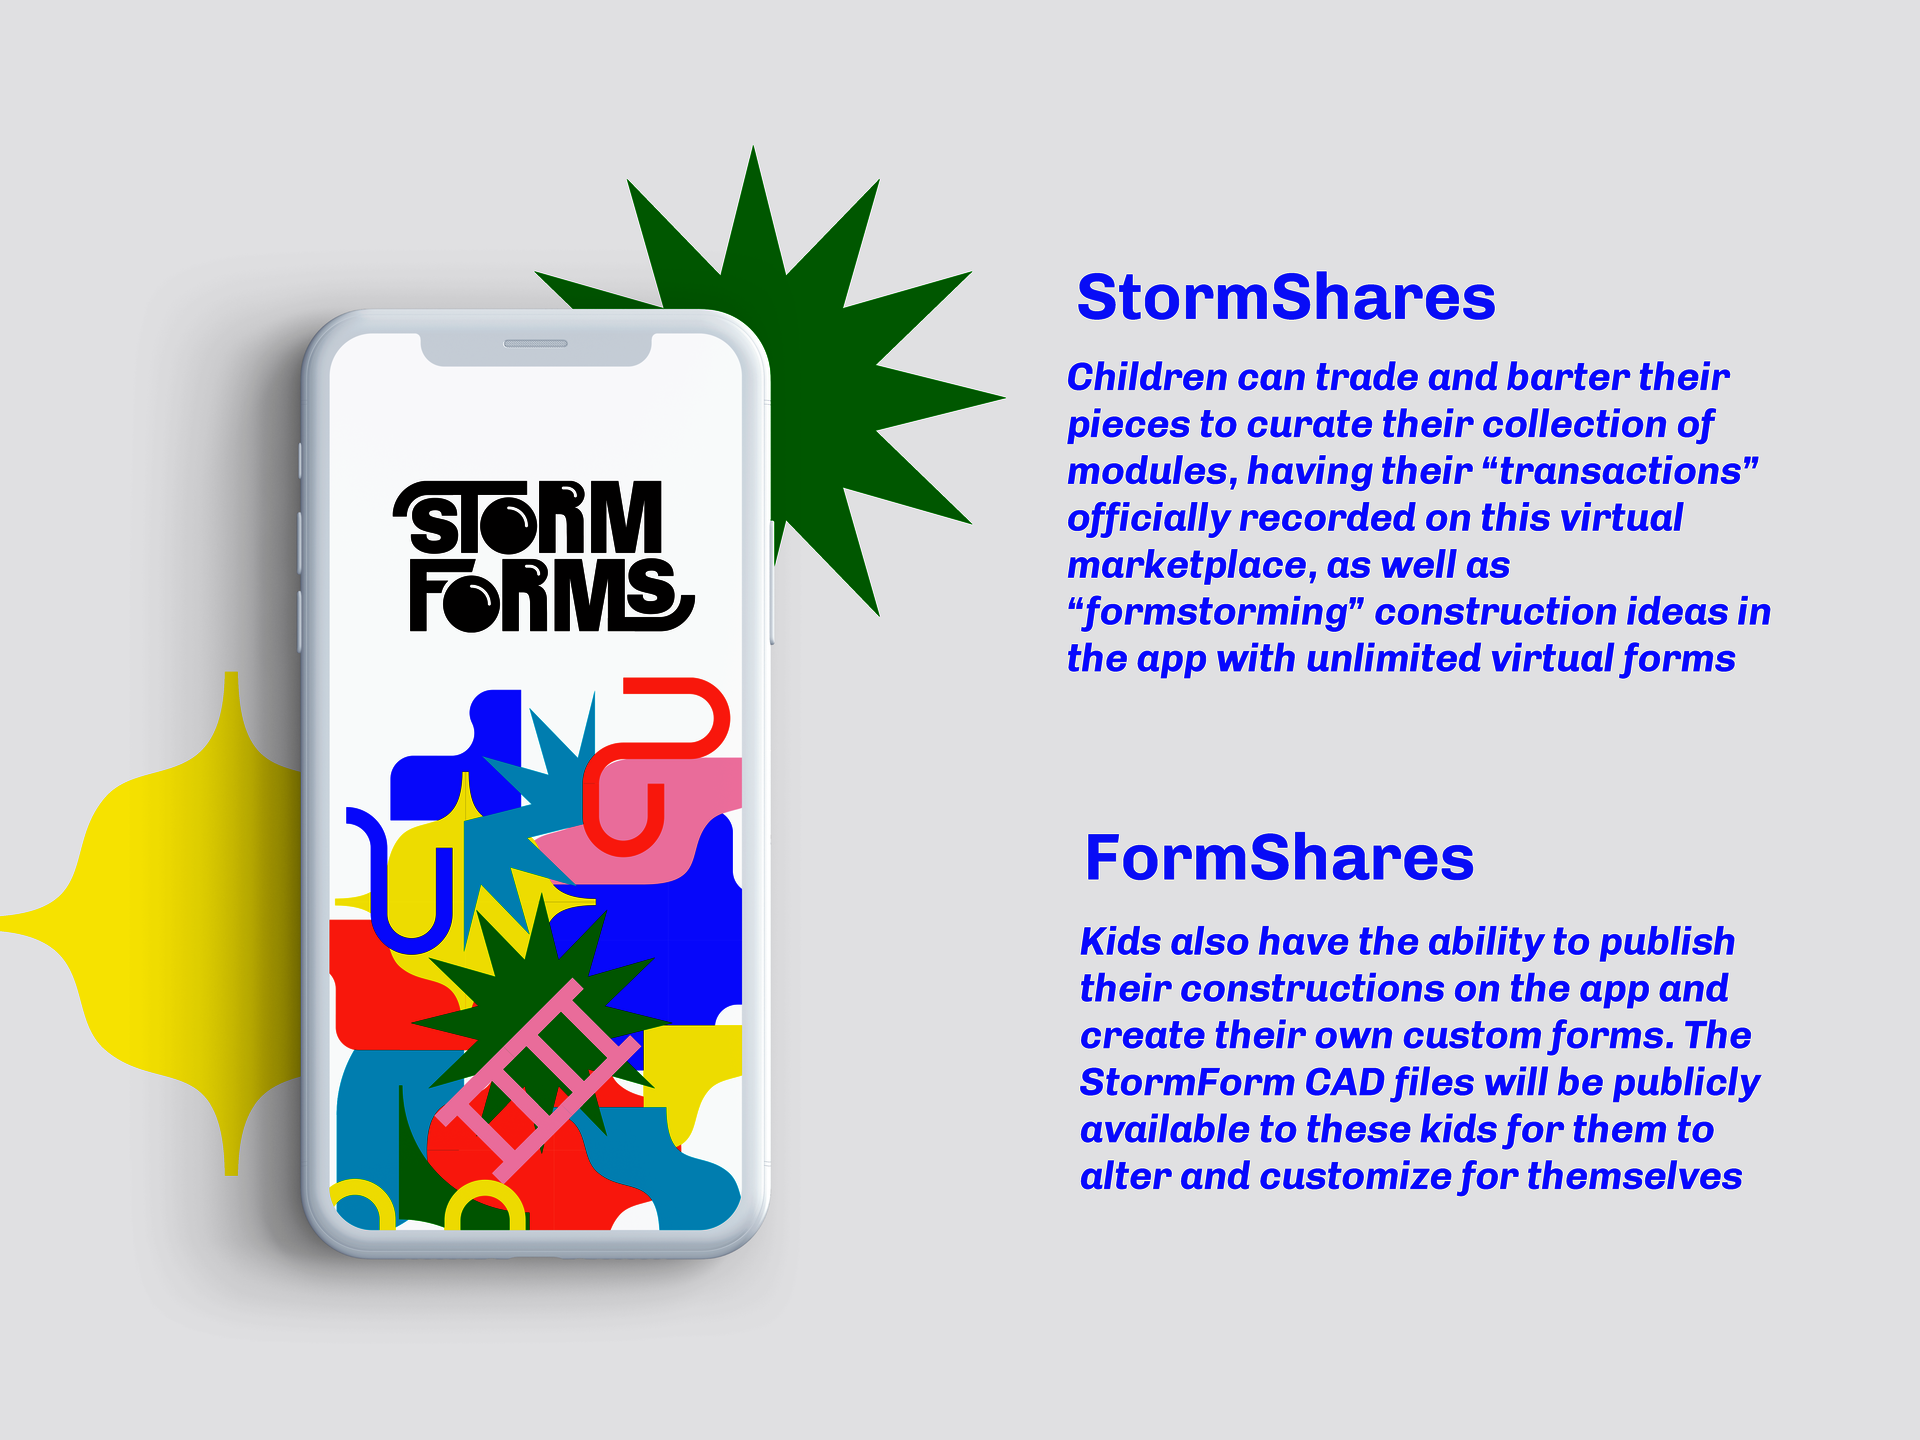 StormForms is a modular long-form play system to be used in a classroom or group setting